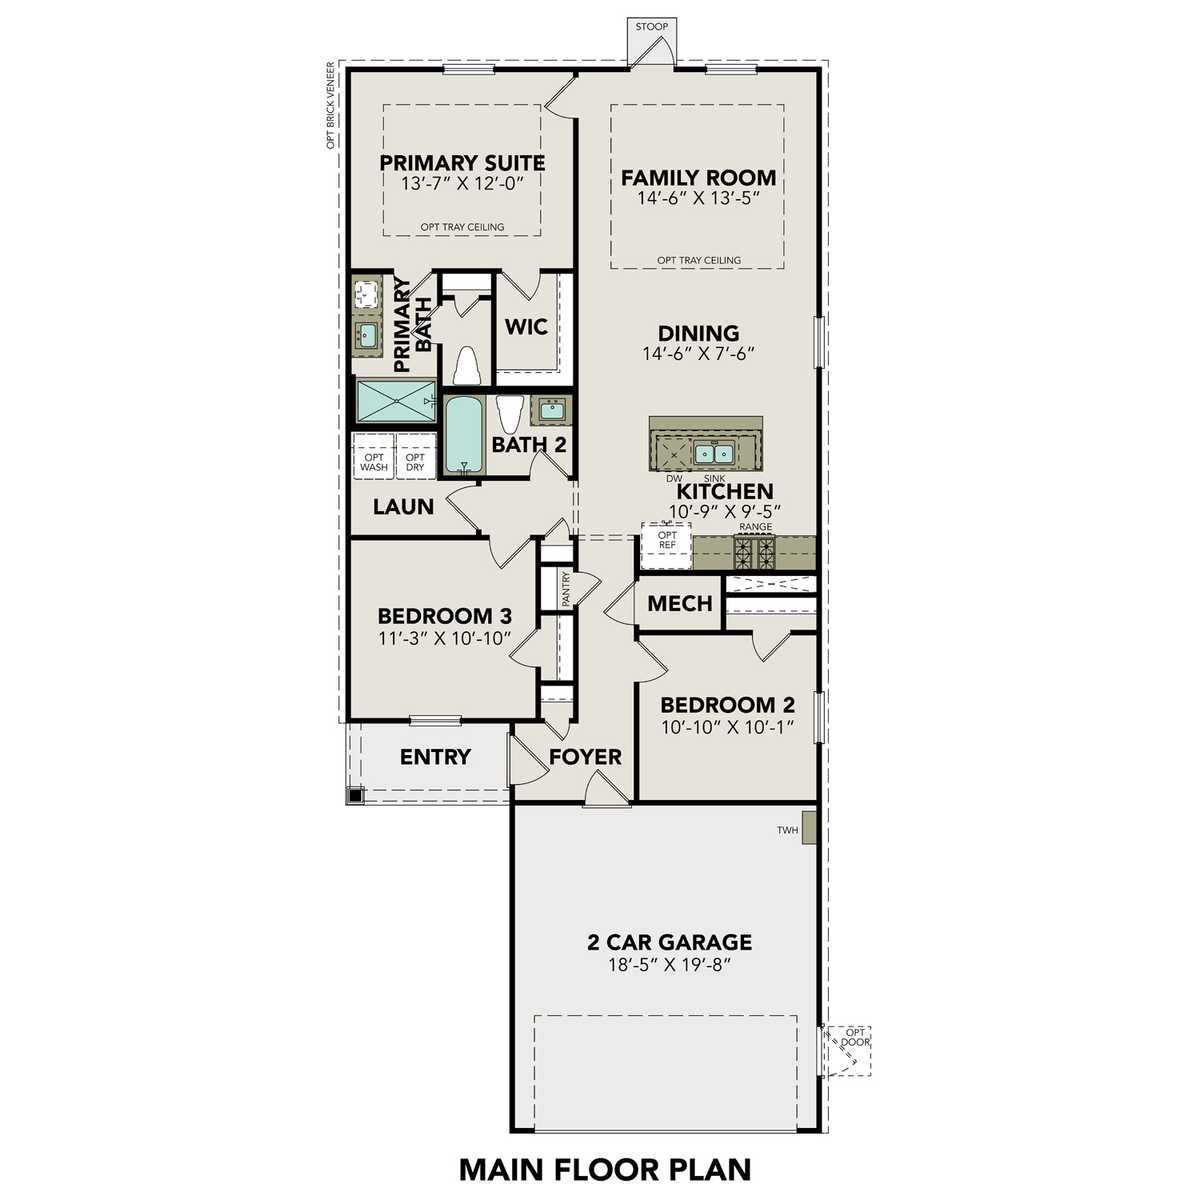 1 - The Comal Brick floor plan layout for 8316 Bristlecone Pine Way in Davidson Homes' Lakes at Black Oak community.